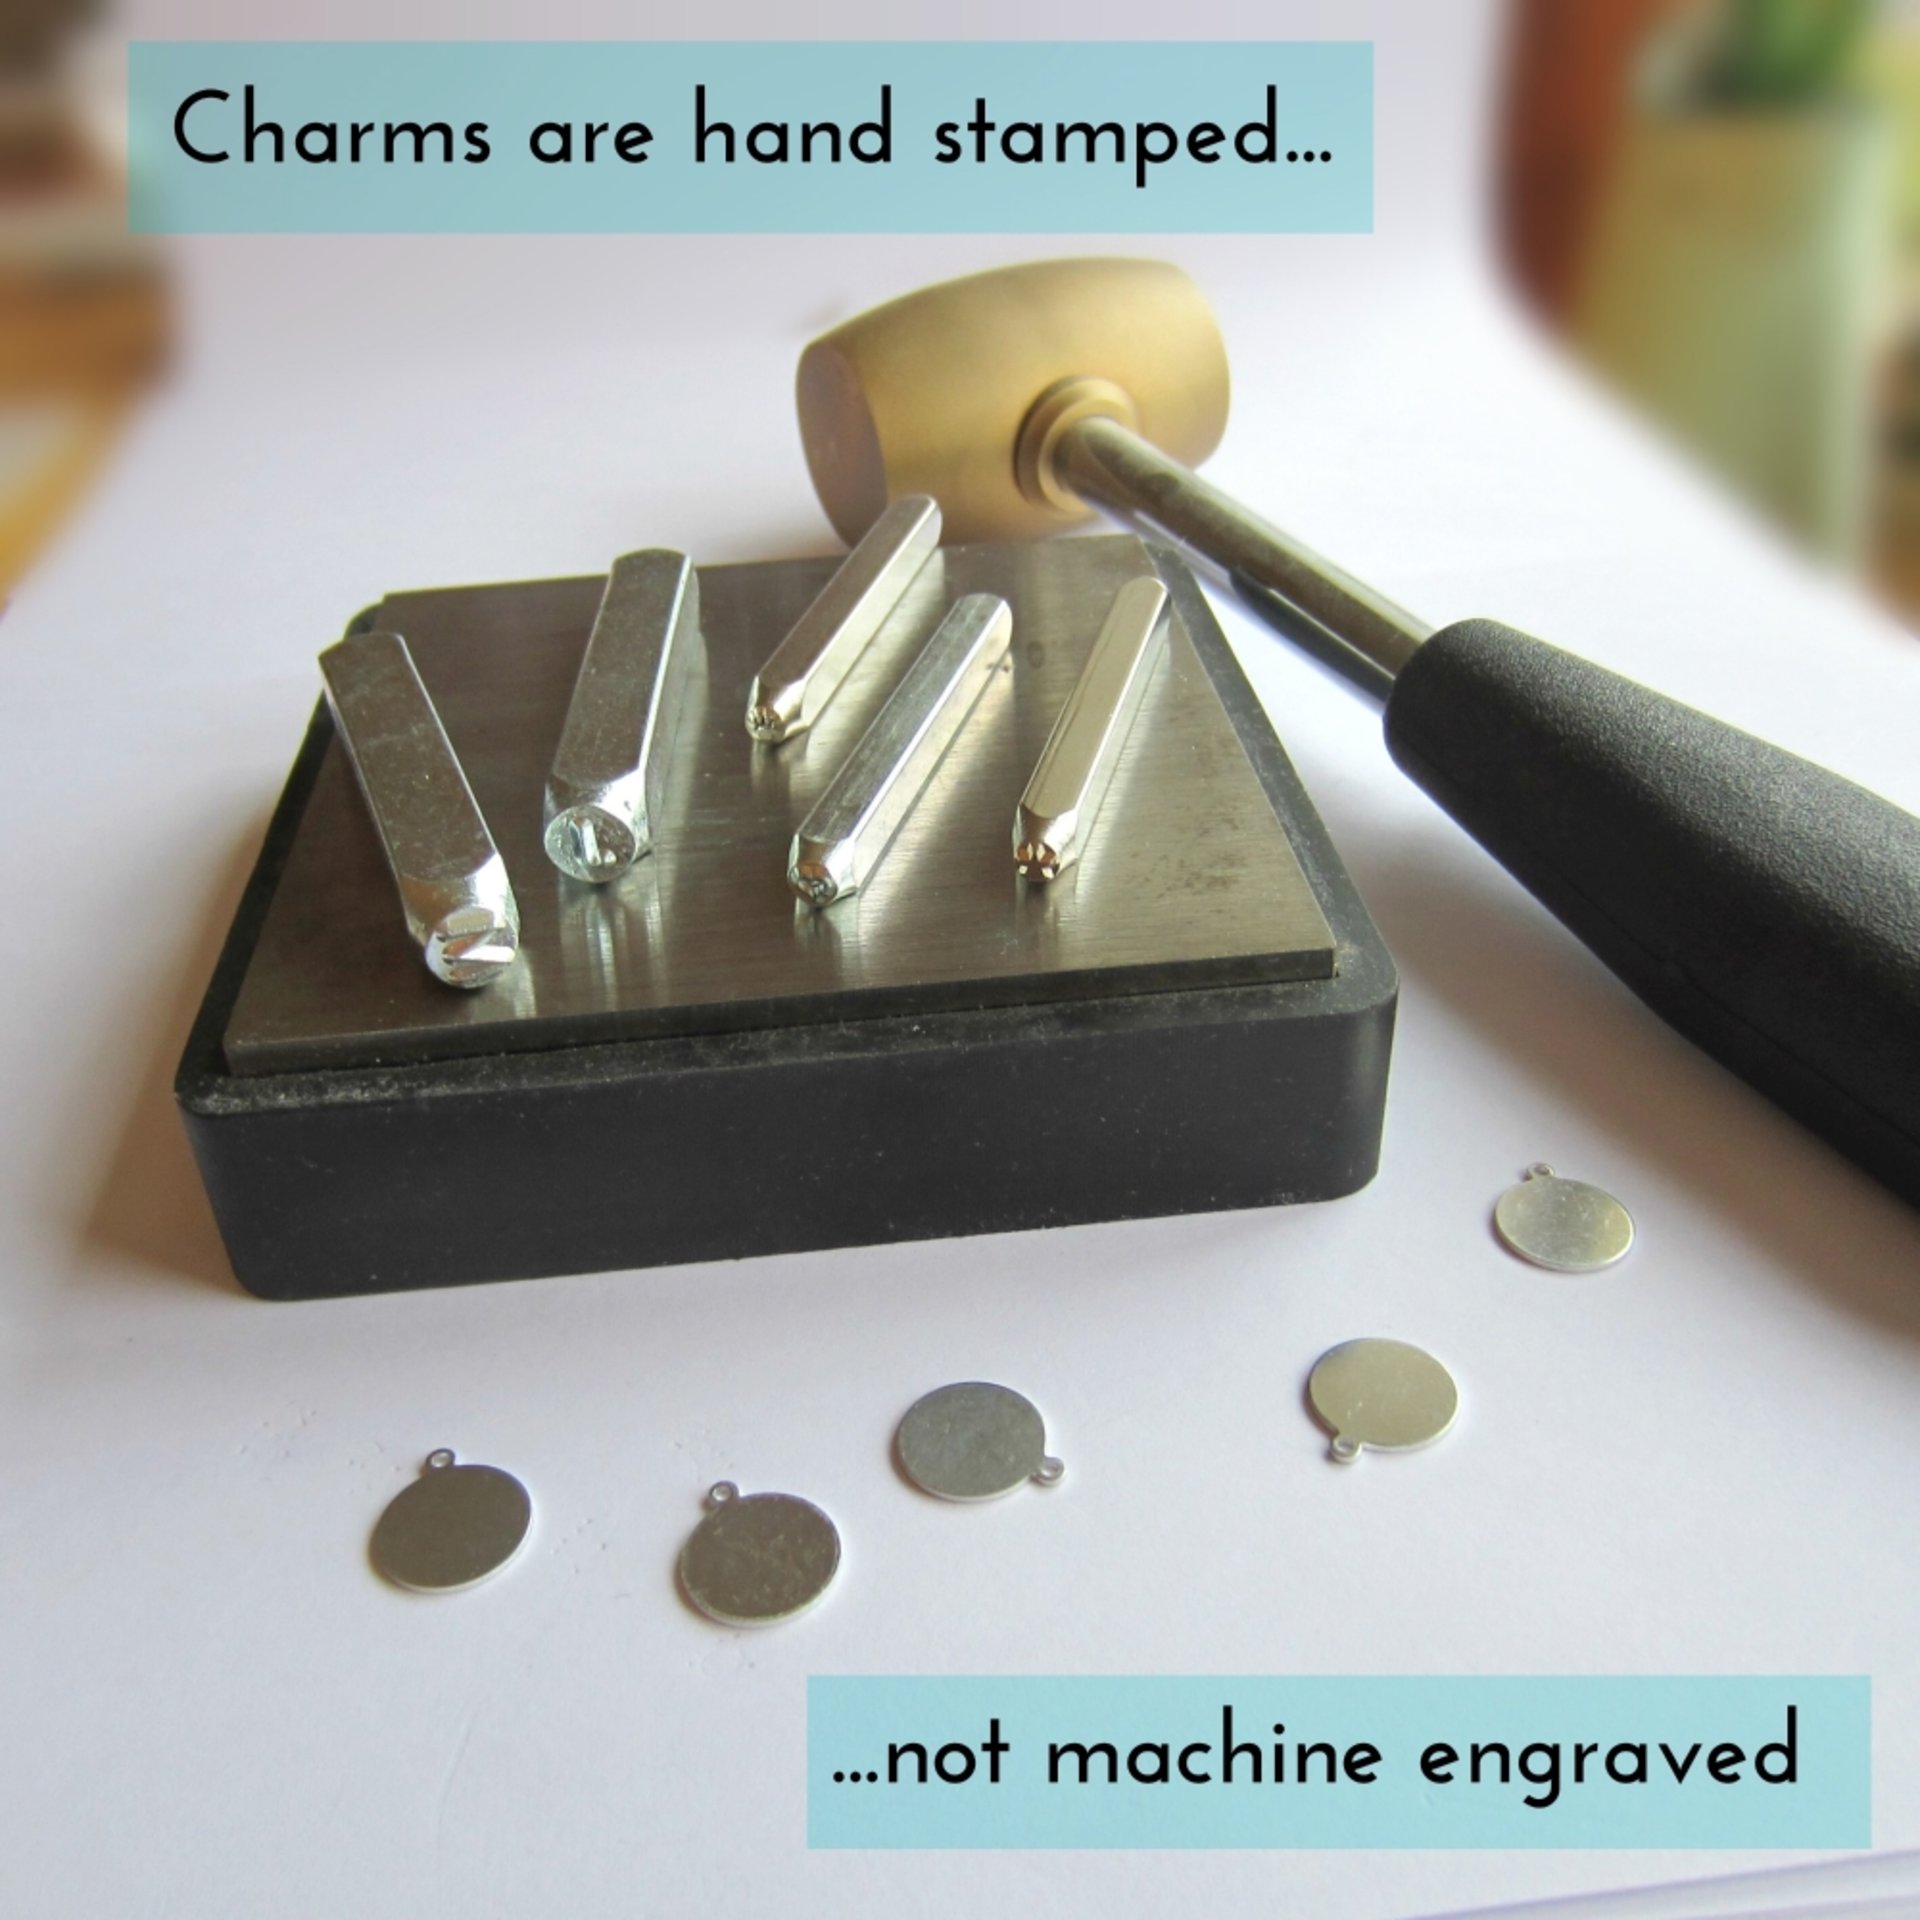 Hand stamping equipment for jewellery making - The Tiny Tree Frog Jewellery